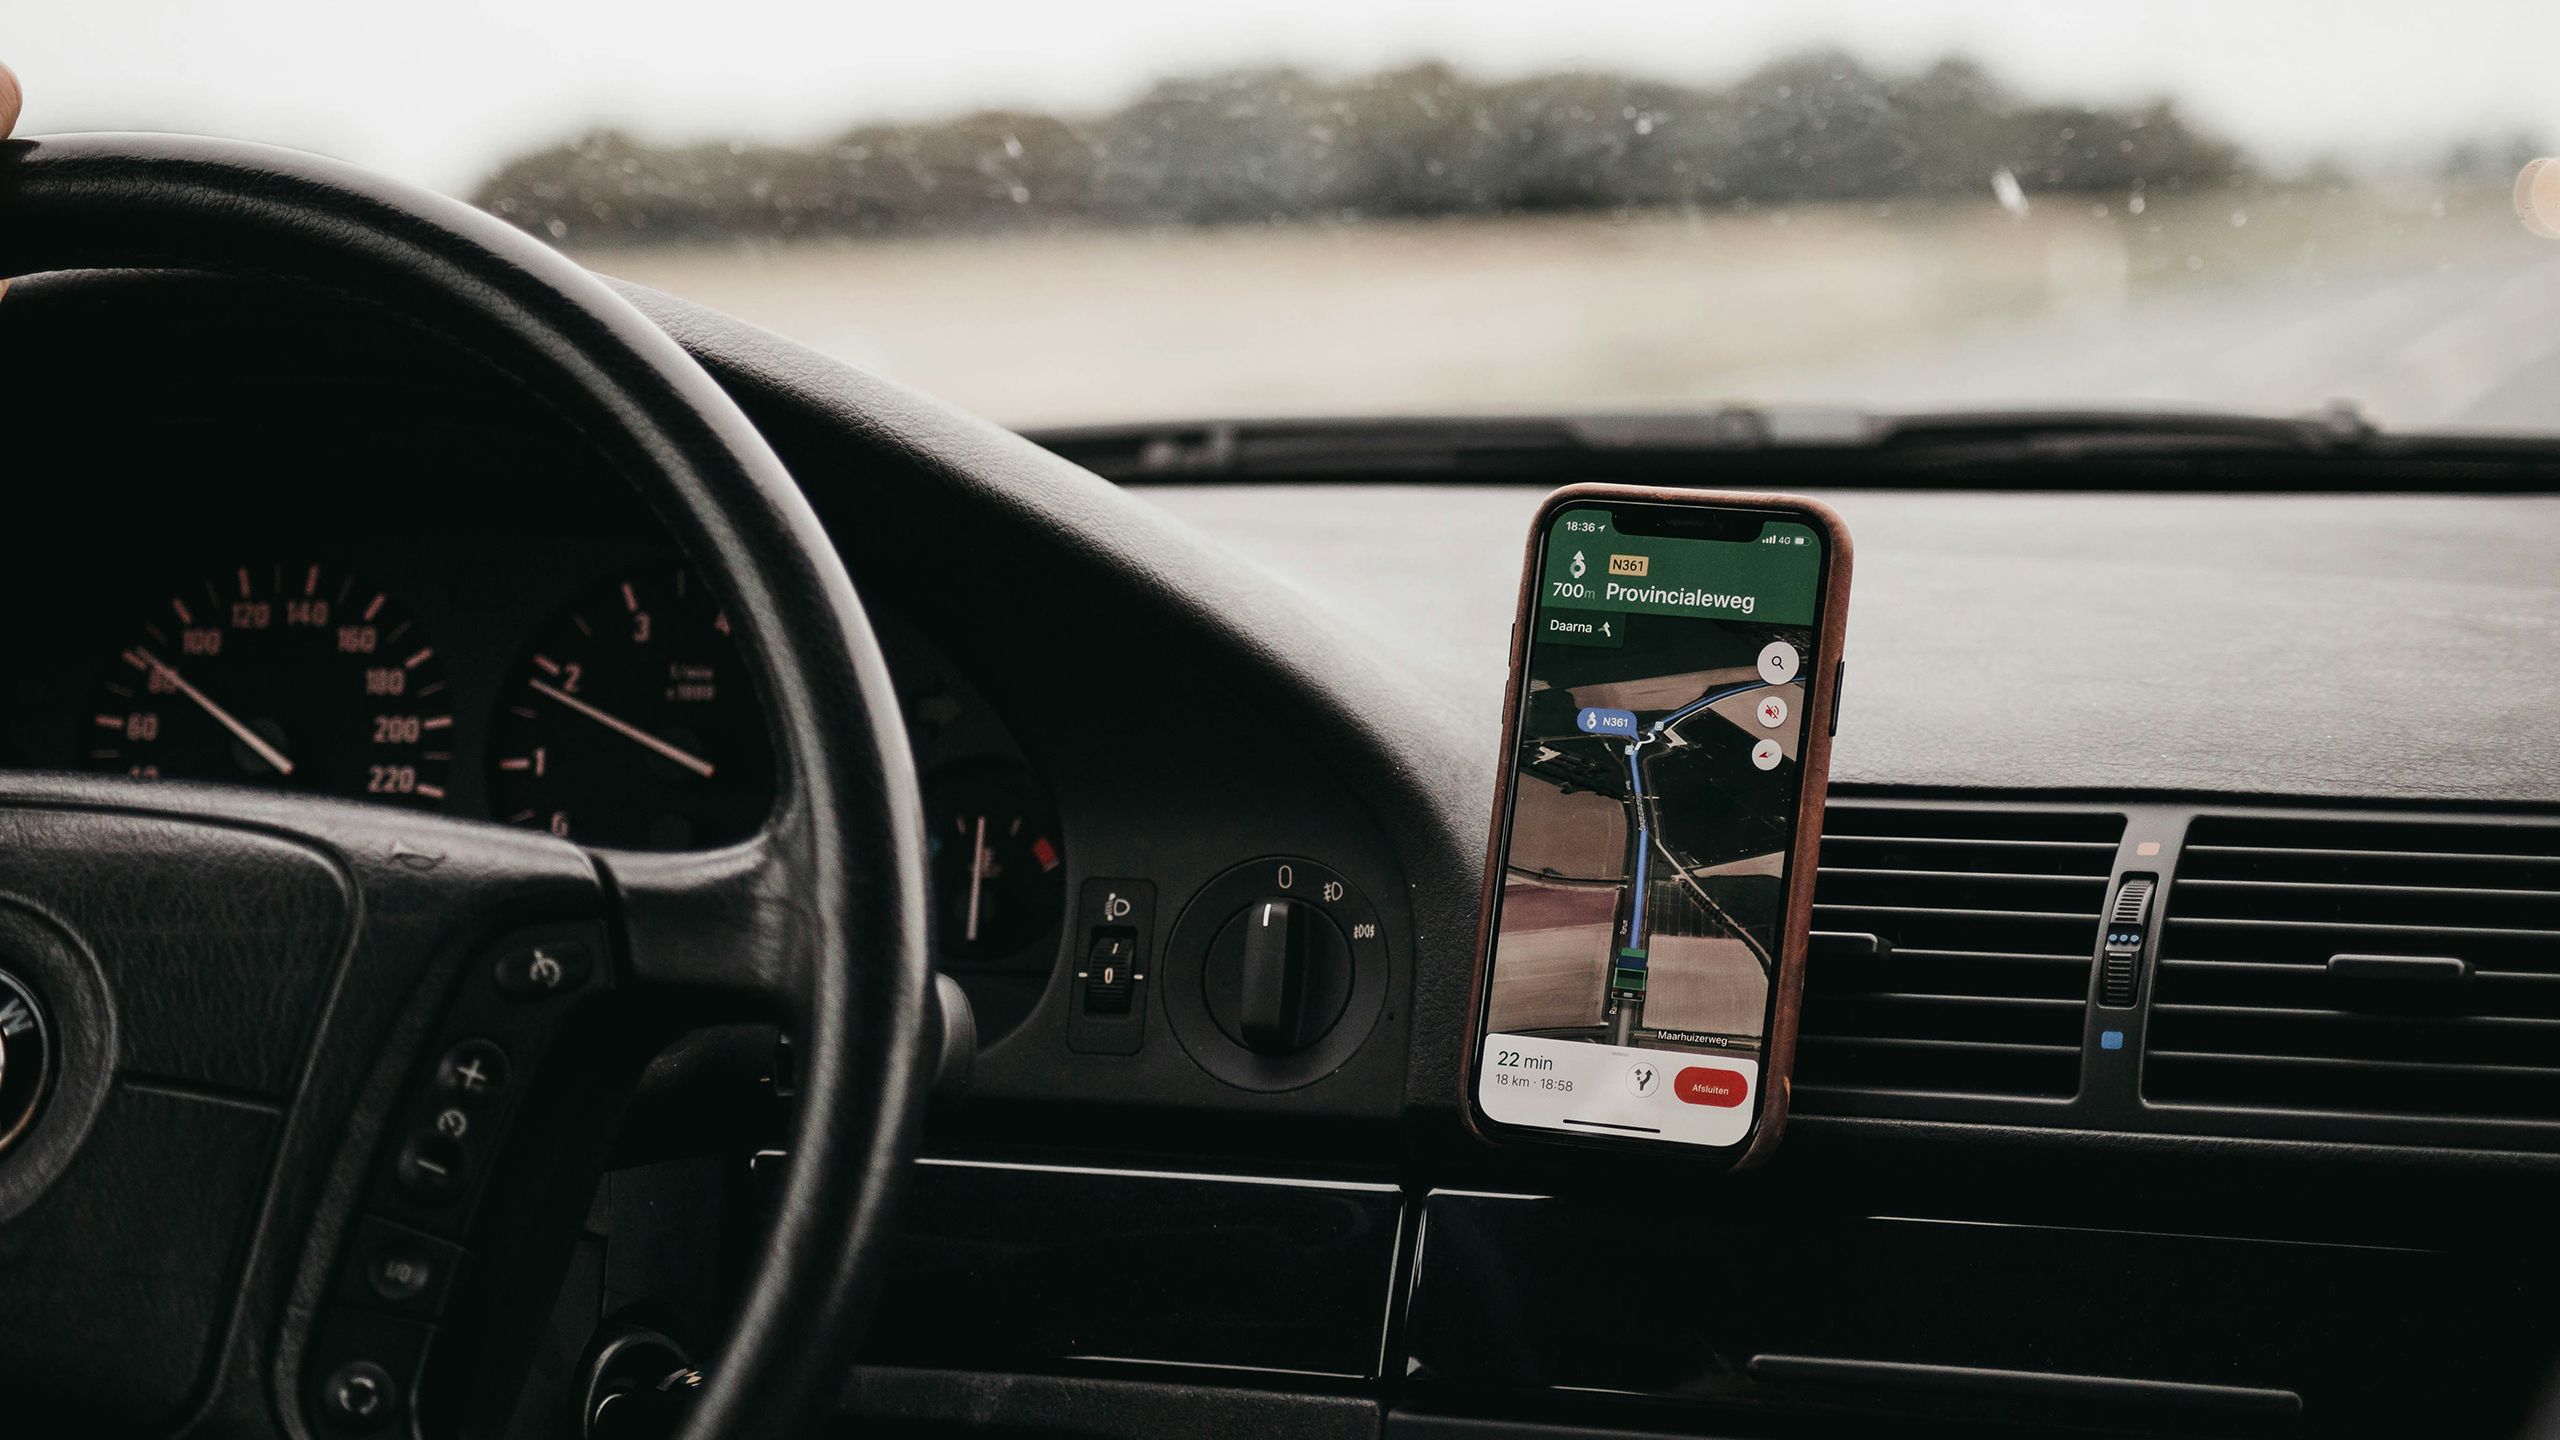 Google Maps running on a car-mounted iPhone.